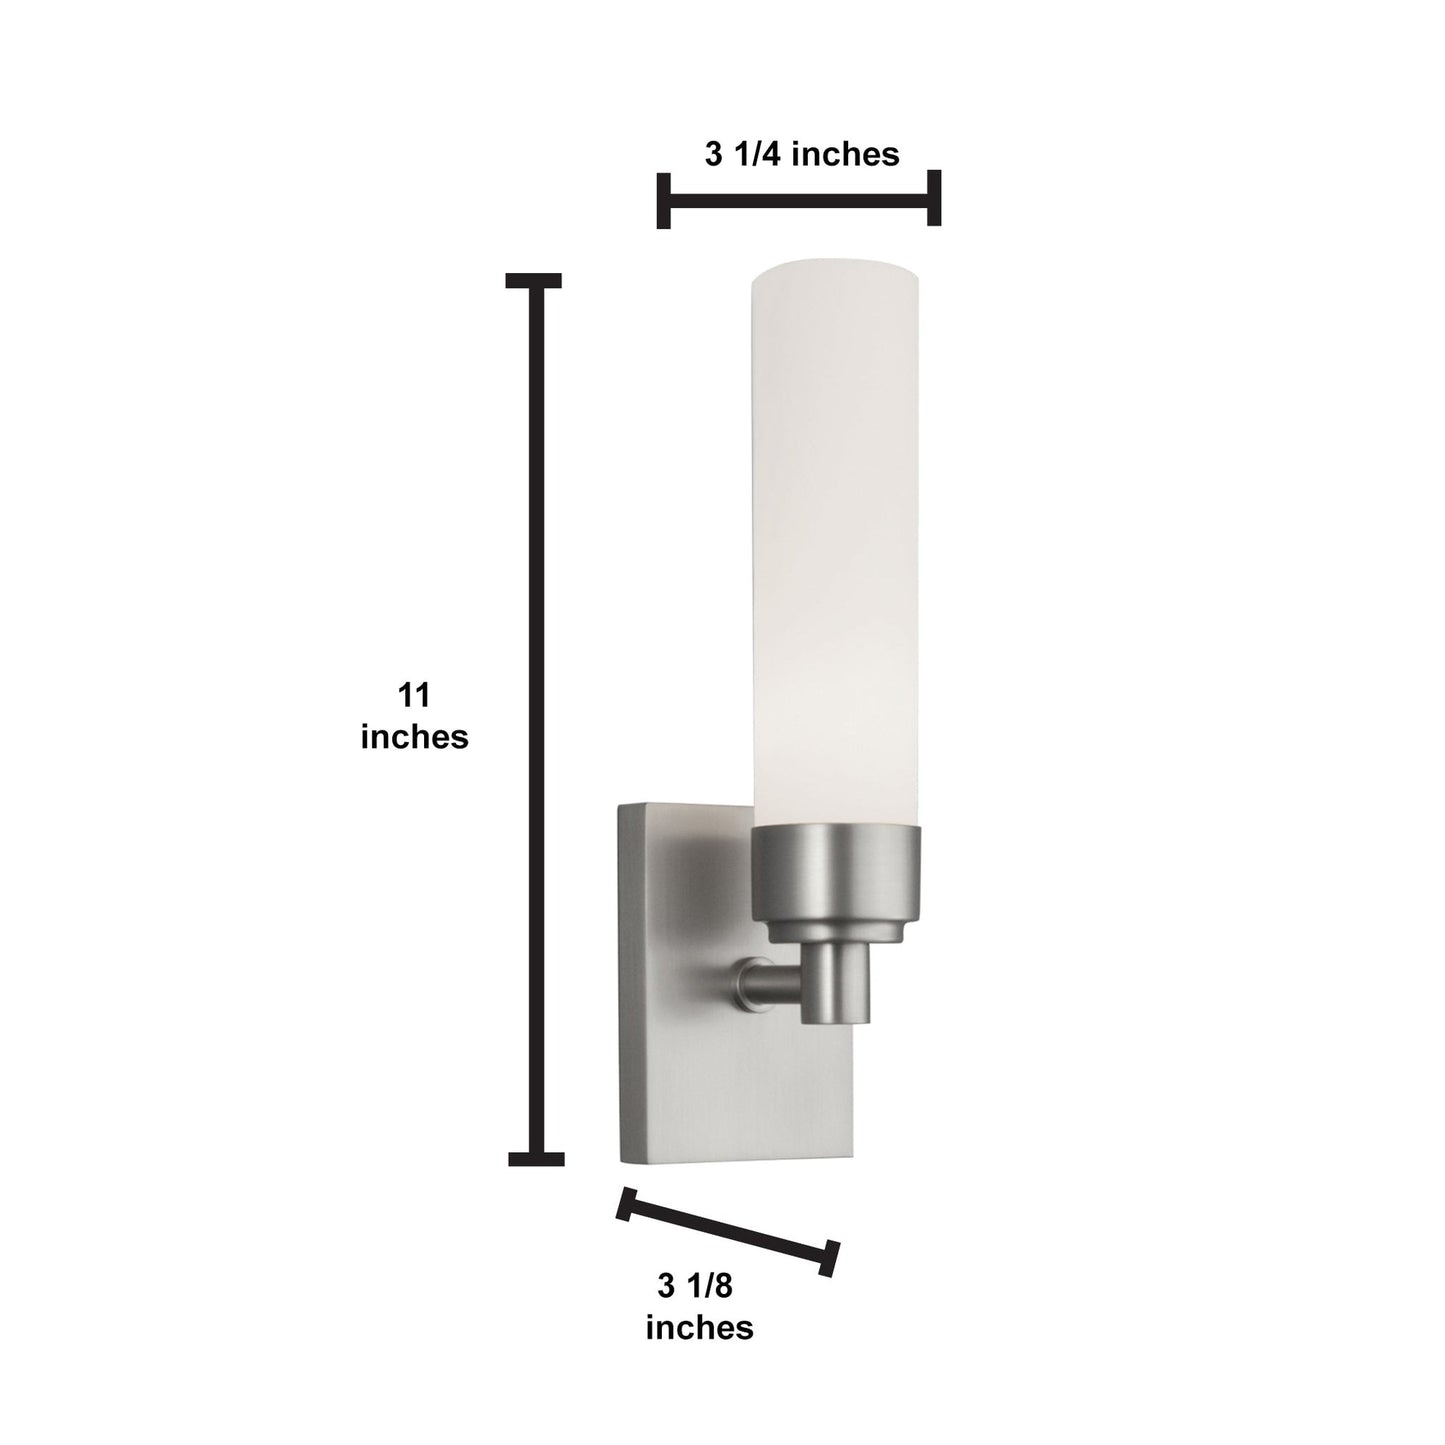 Norwell Lighting Alex 11" x 3" 1-Light Polished Nickel Vanity Light With Matte Opal Glass Diffuser